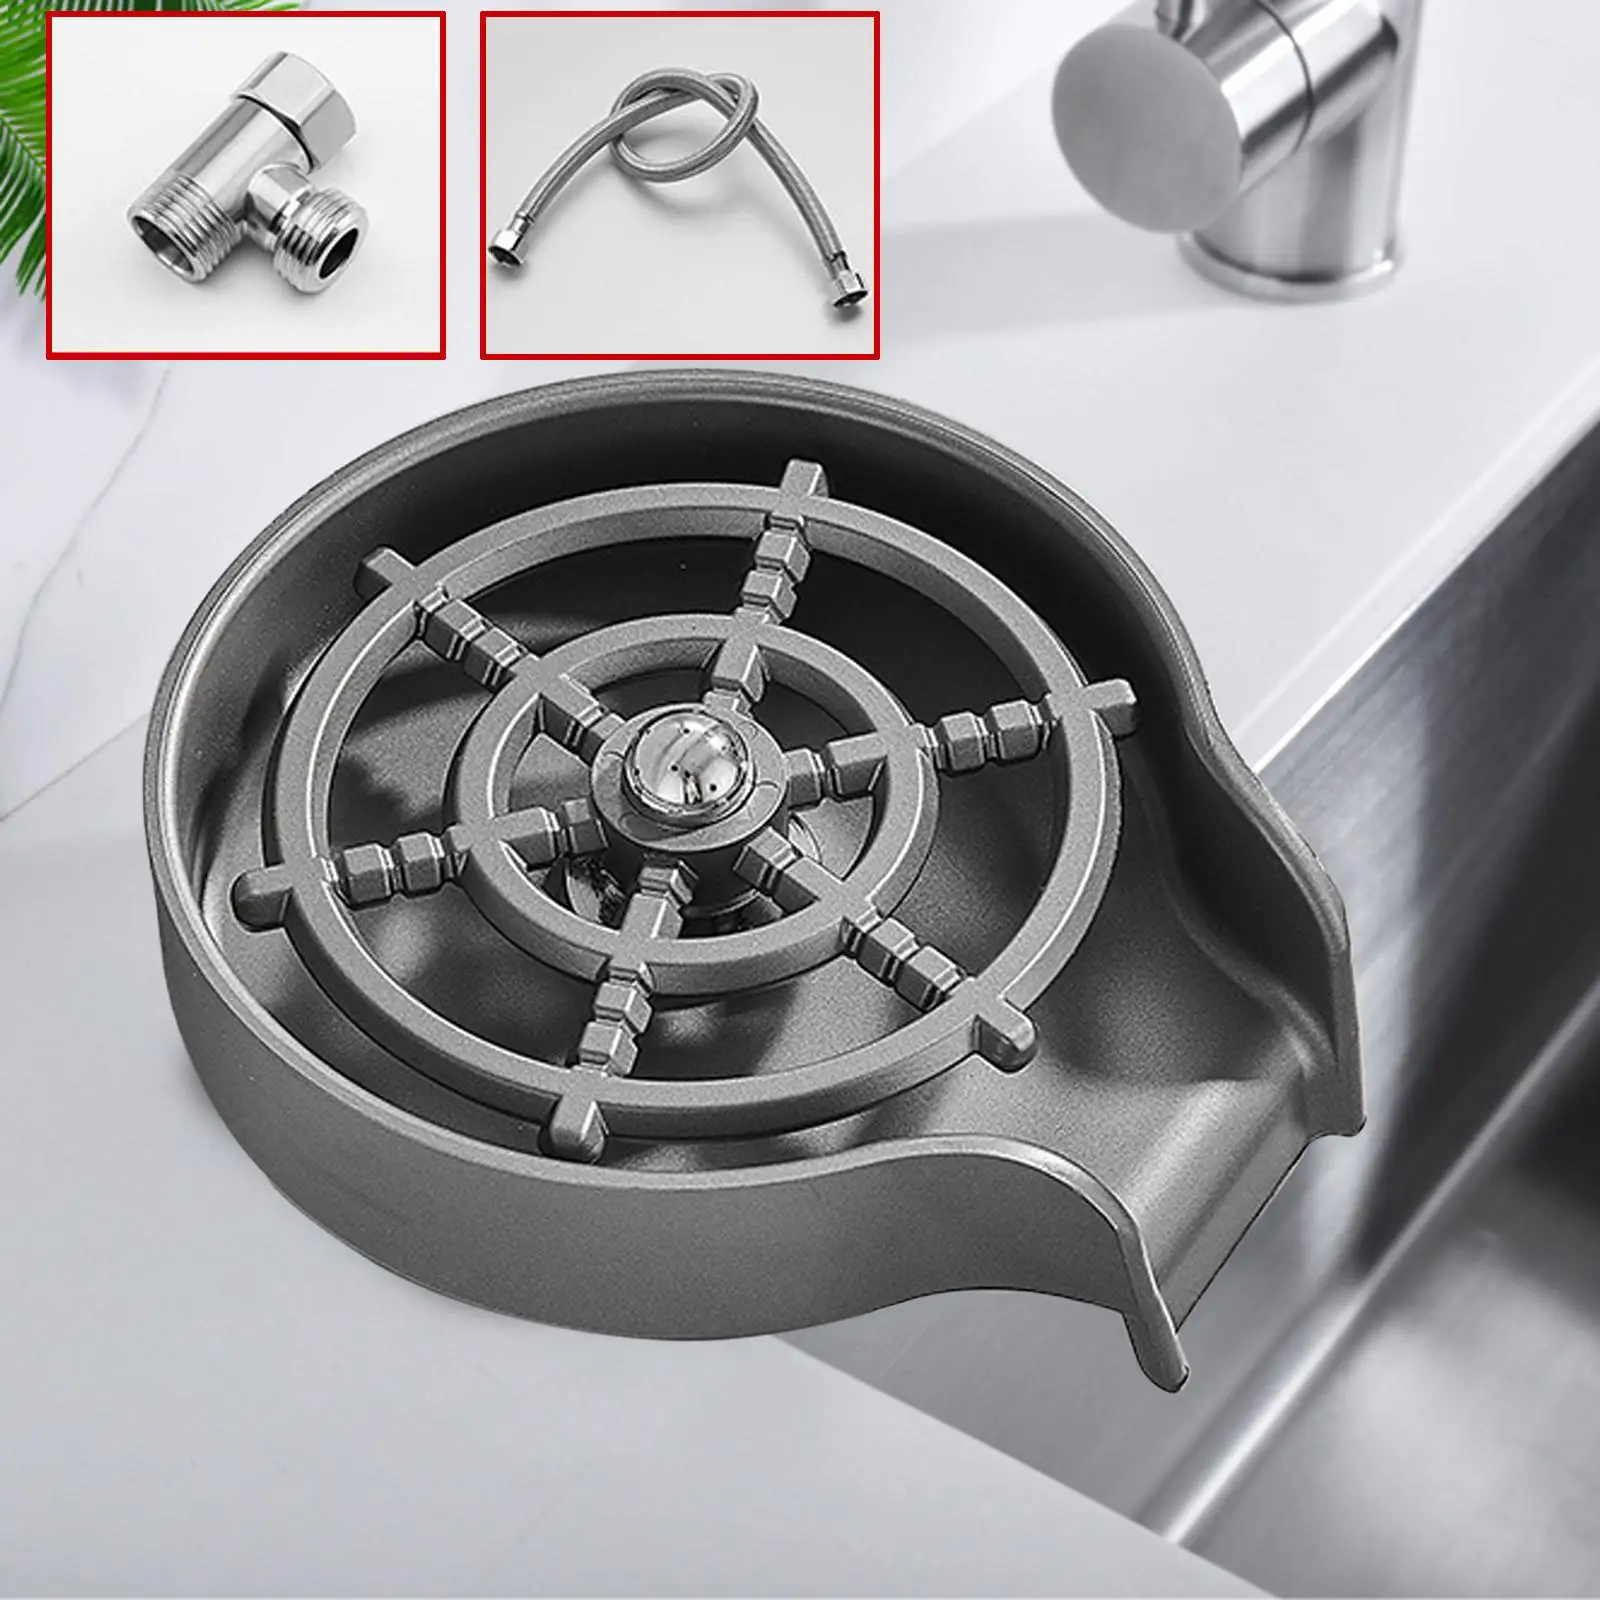 Stainless Steel High Pressure Cup Washer milk cups Washer Kitchen Sink Bottle Washer Automatic rinser for Glass Cleaner